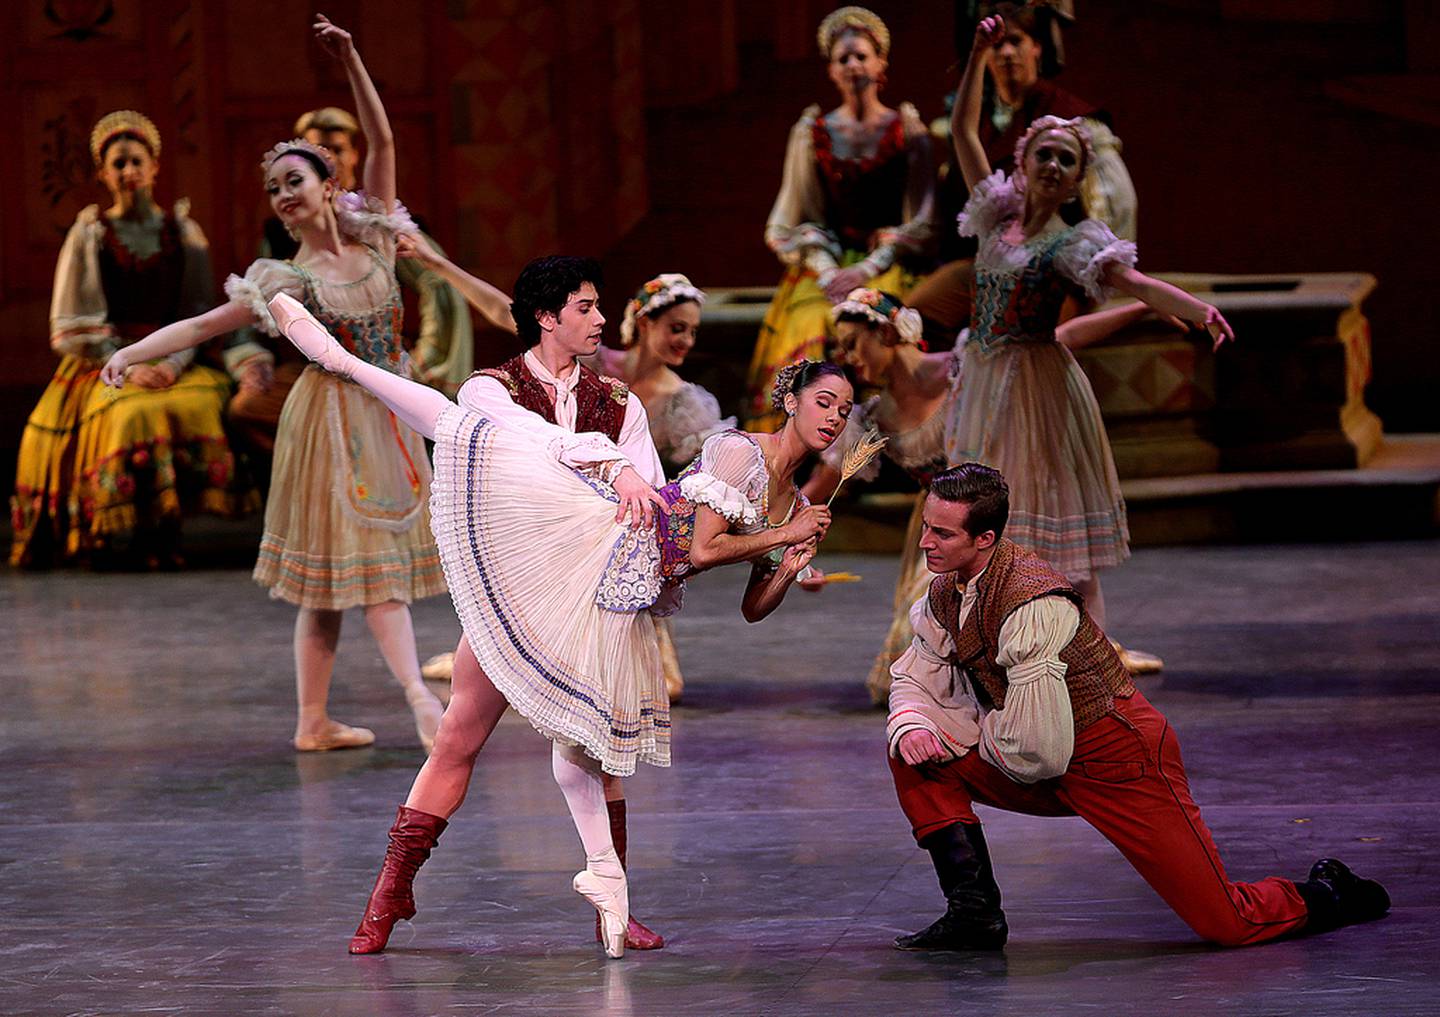 Misty Copeland makes her debut as principal in Coppelia in Abu Dhabi in 2014. Photo: American Ballet Theatre